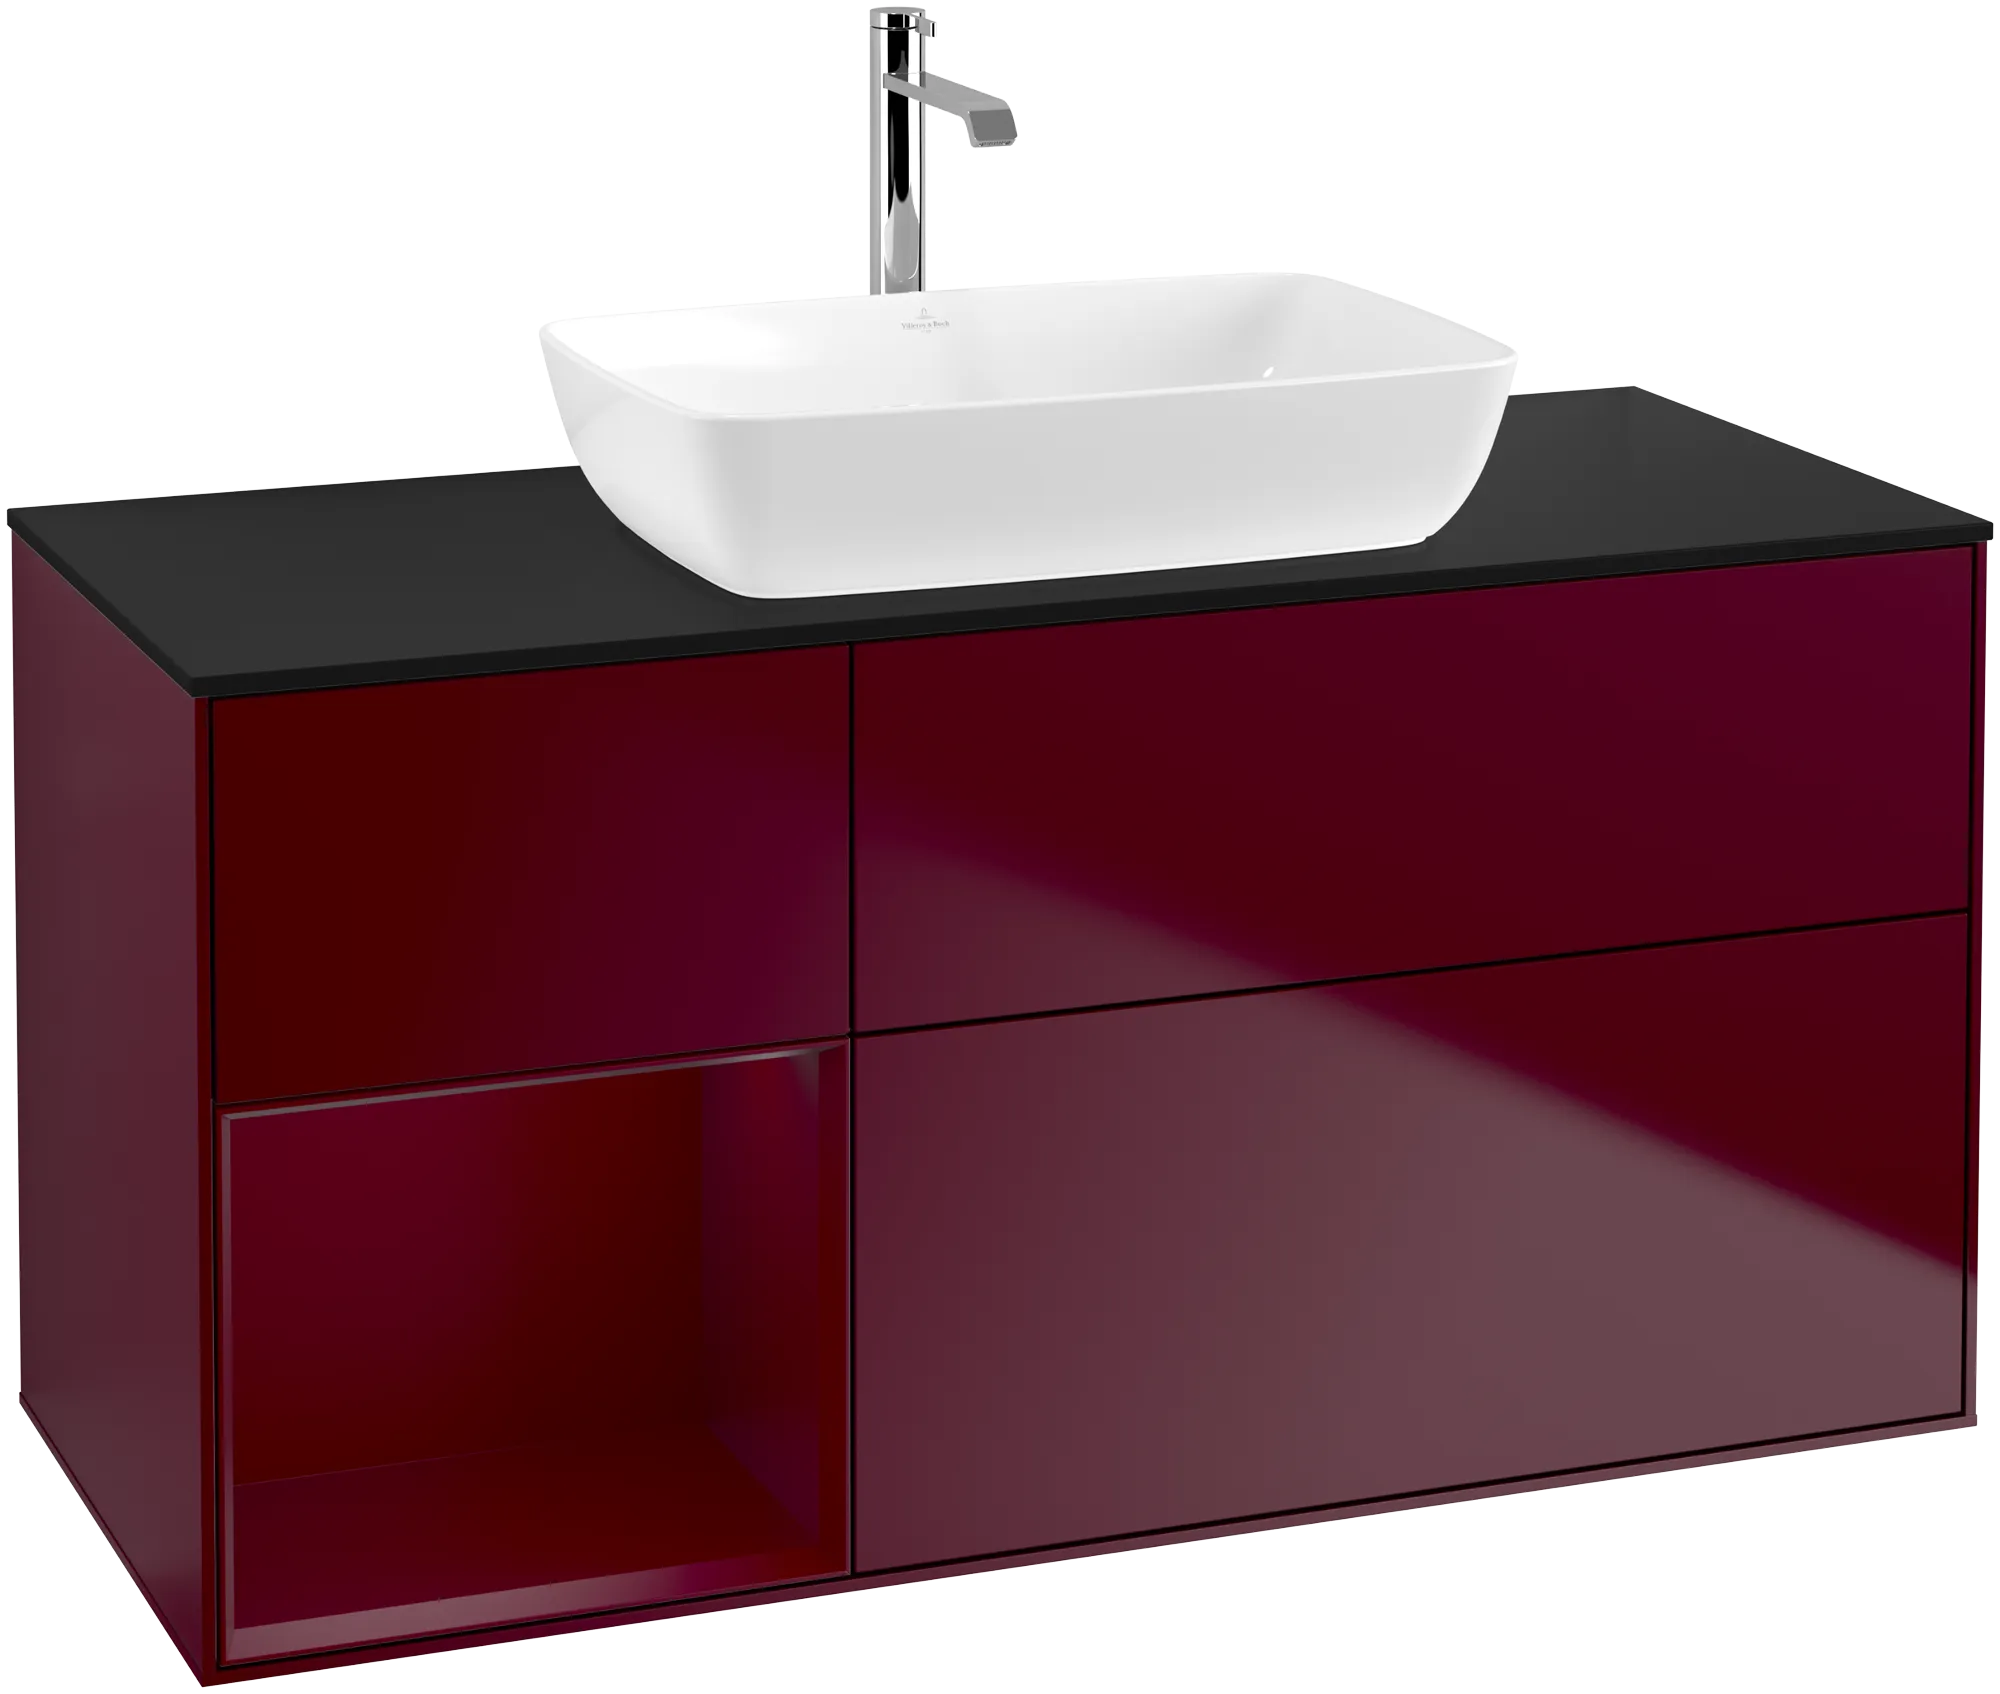 Obrázek VILLEROY BOCH Finion Vanity unit, with lighting, 3 pull-out compartments, 1200 x 603 x 501 mm, Peony Matt Lacquer / Peony Matt Lacquer / Glass Black Matt #G822HBHB